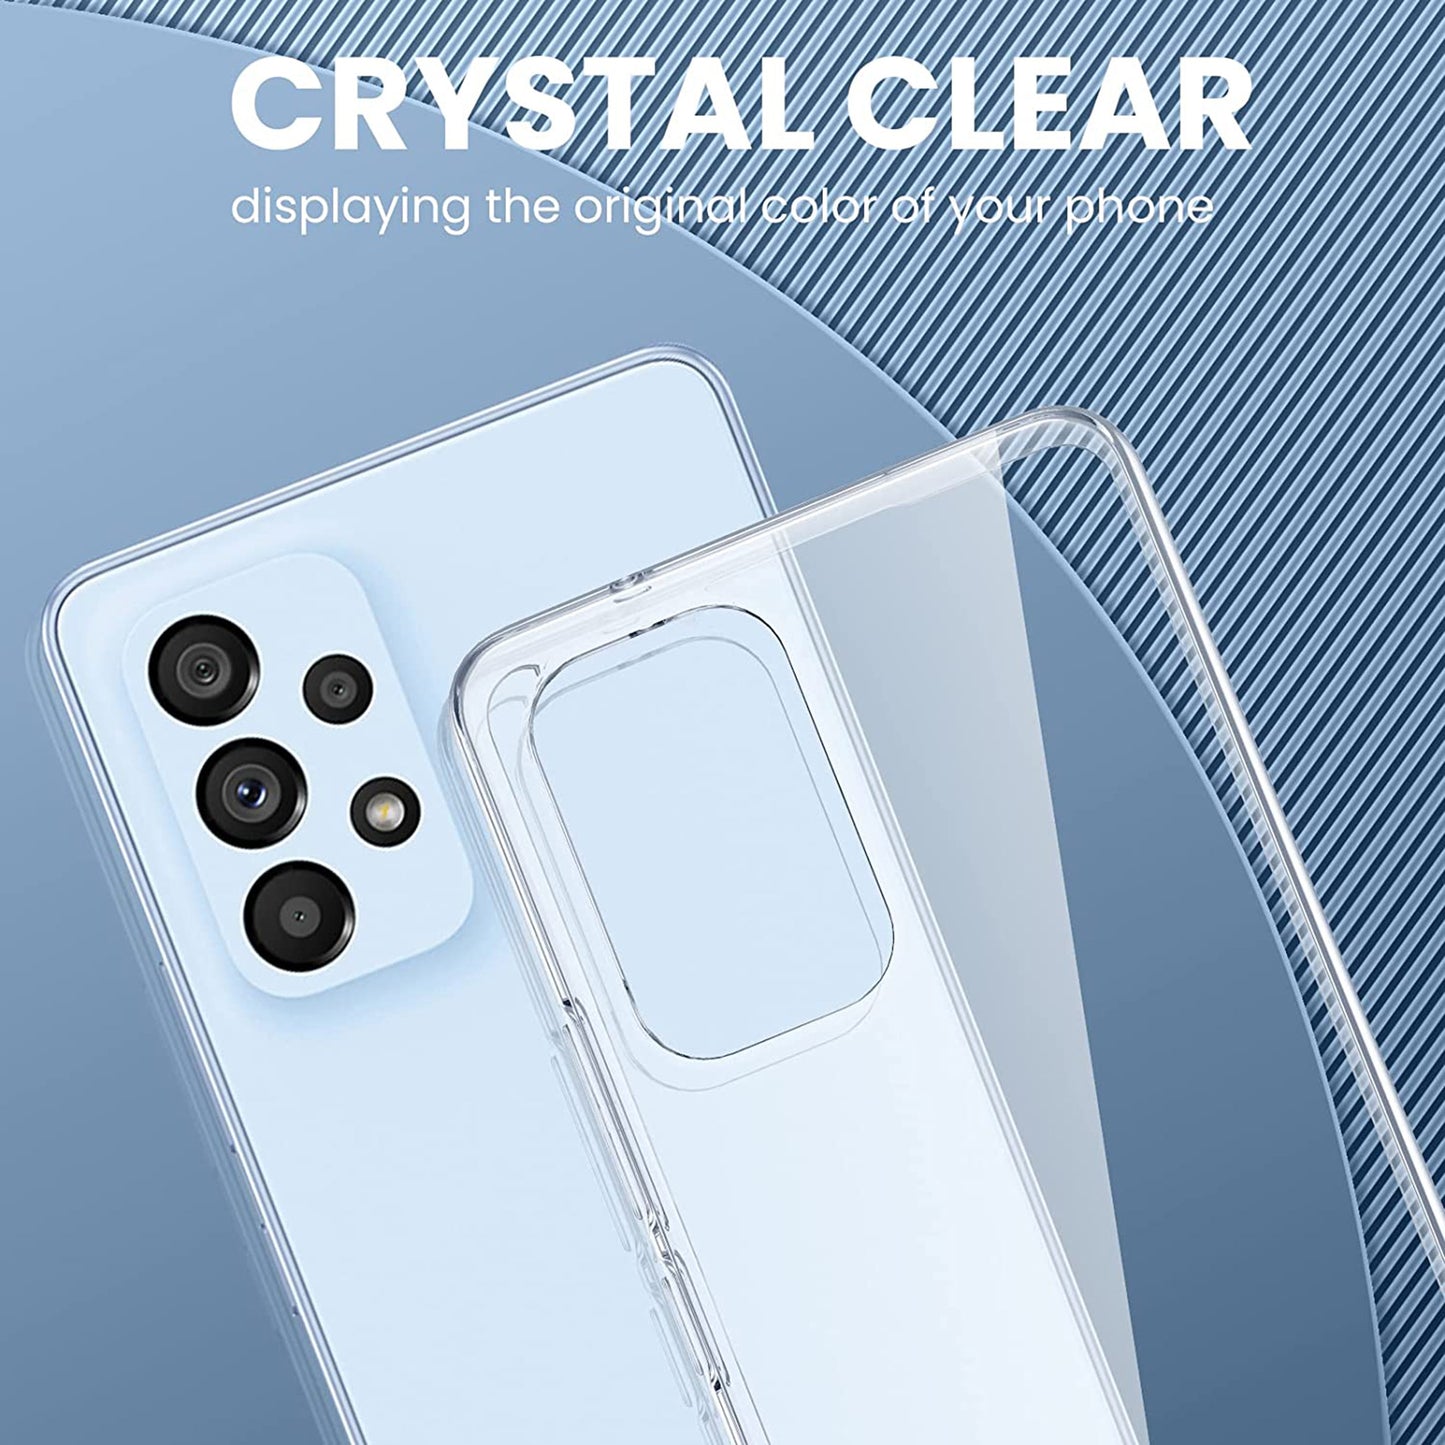 MEZON Galaxy A23 Ultra Slim Crystal Clear Premium TPU Gel Back Case – Shock Absorption, Wireless Charging Compatible